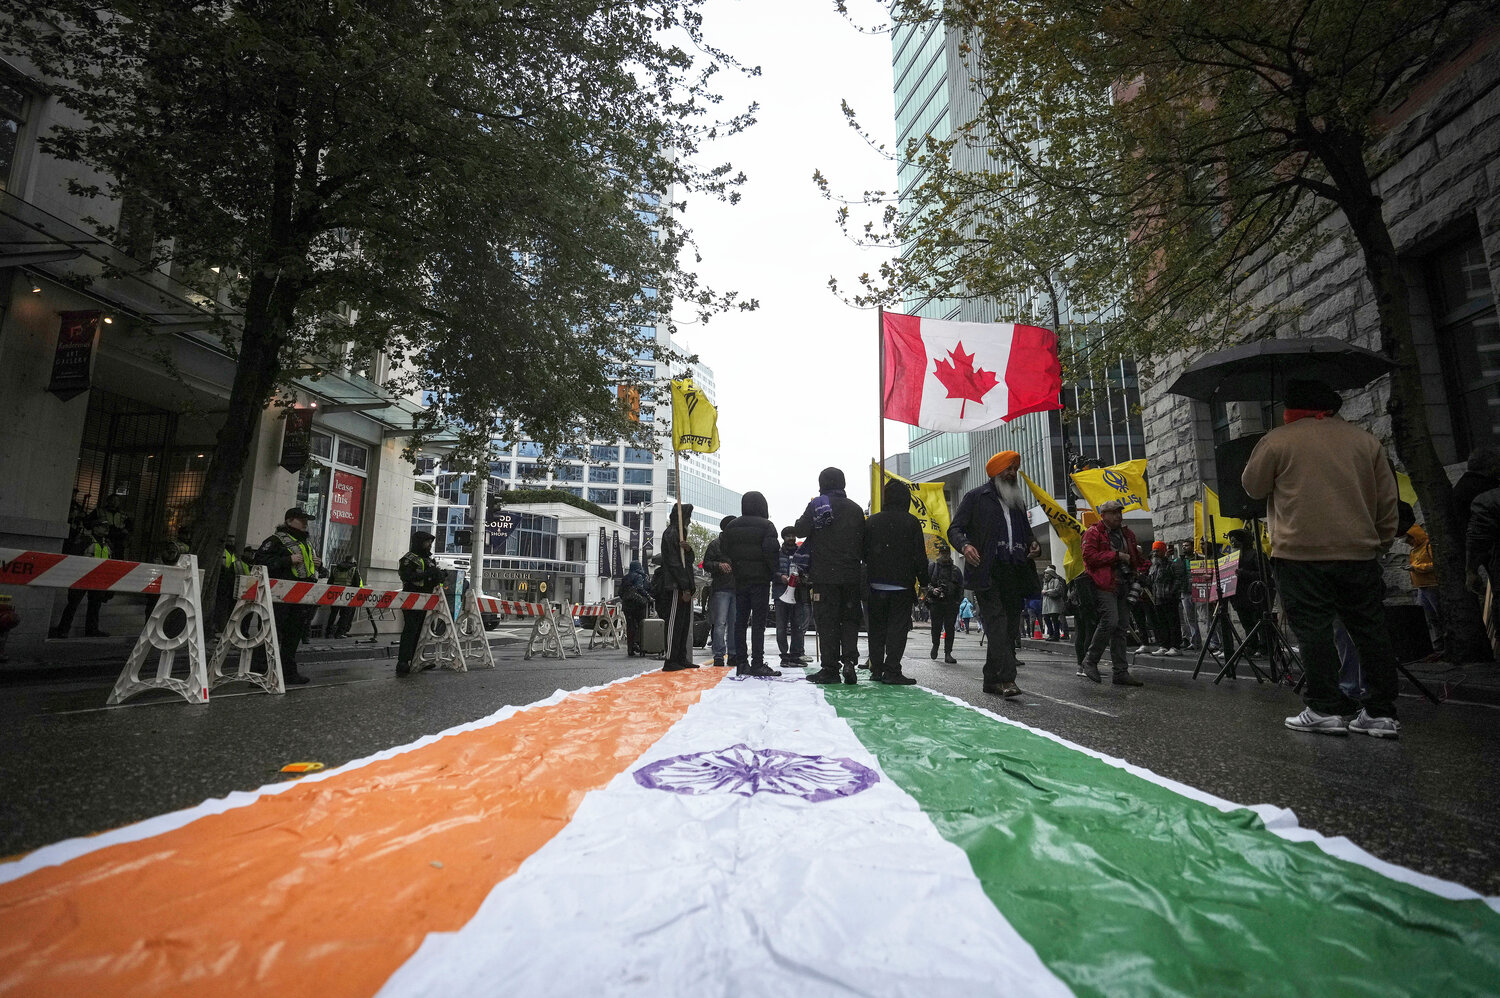 An Indian flag is laid on the street as protesters wave a Canadian and Khalistan flags during a protest outside the Indian Consulate in Vancouver, British Columbia, on Monday, Sept. 25, 2023. (Darryl Dyck/The Canadian Press via AP)